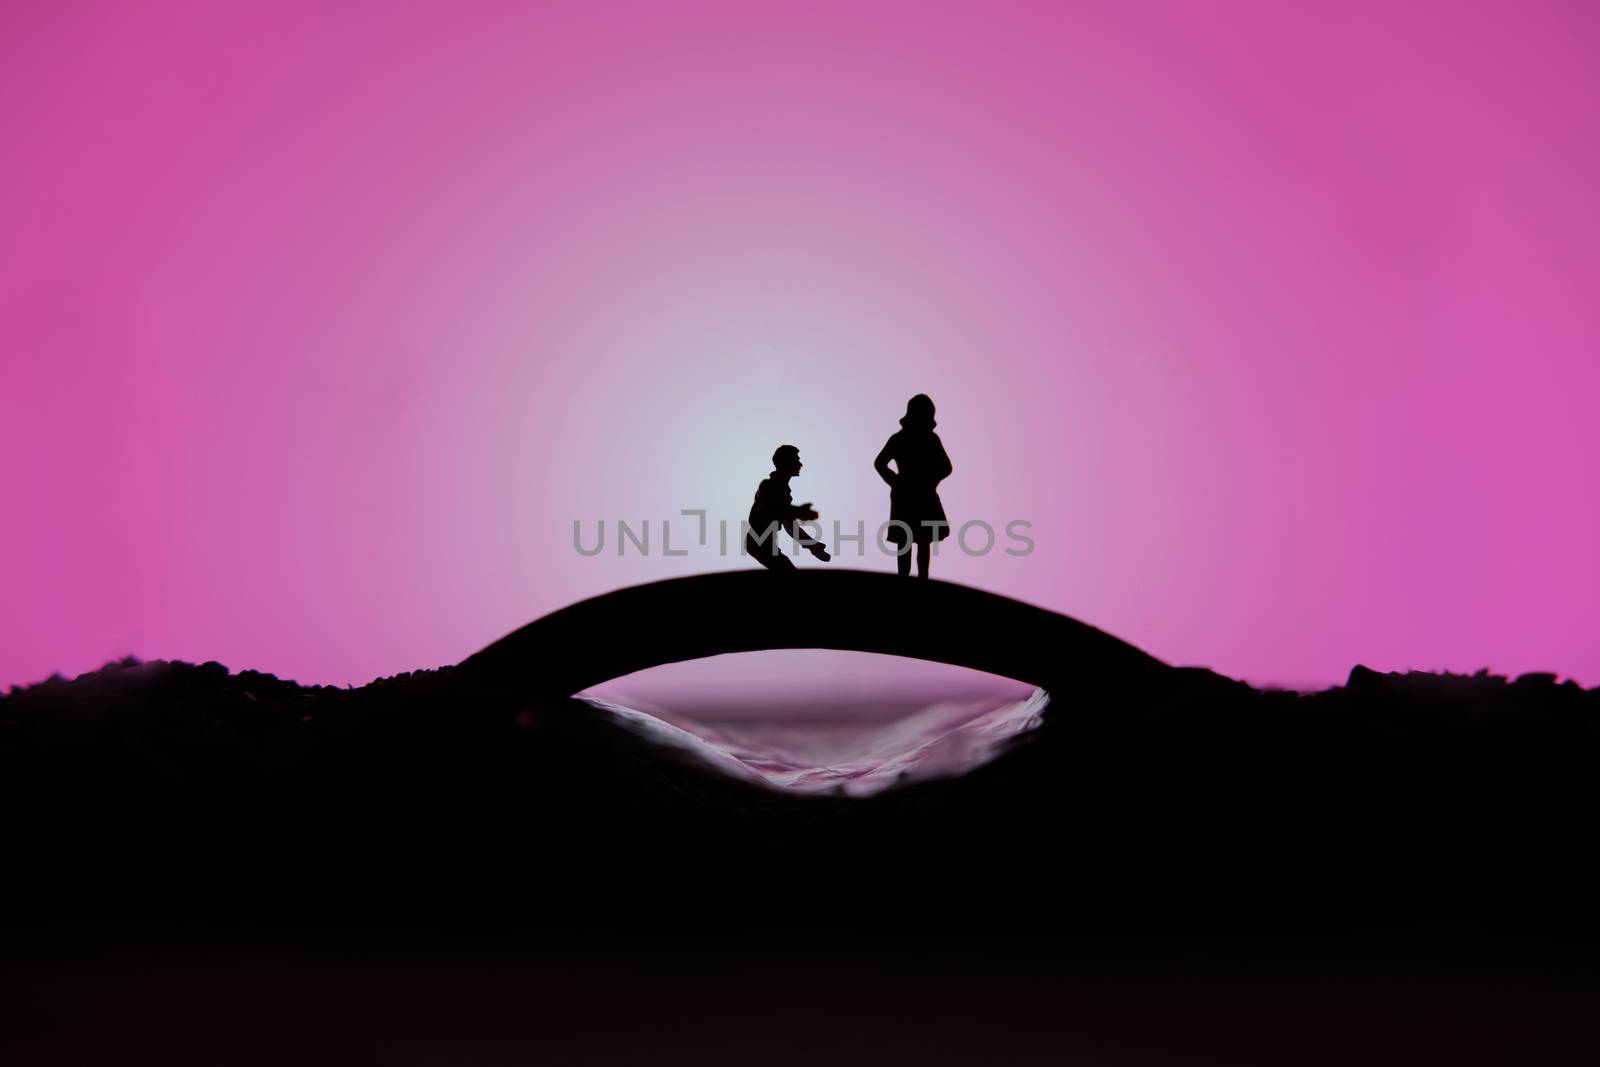 miniature people / toy photography - conceptual valentine holiday illustration. A man proposing a girl silhouette above the bridge